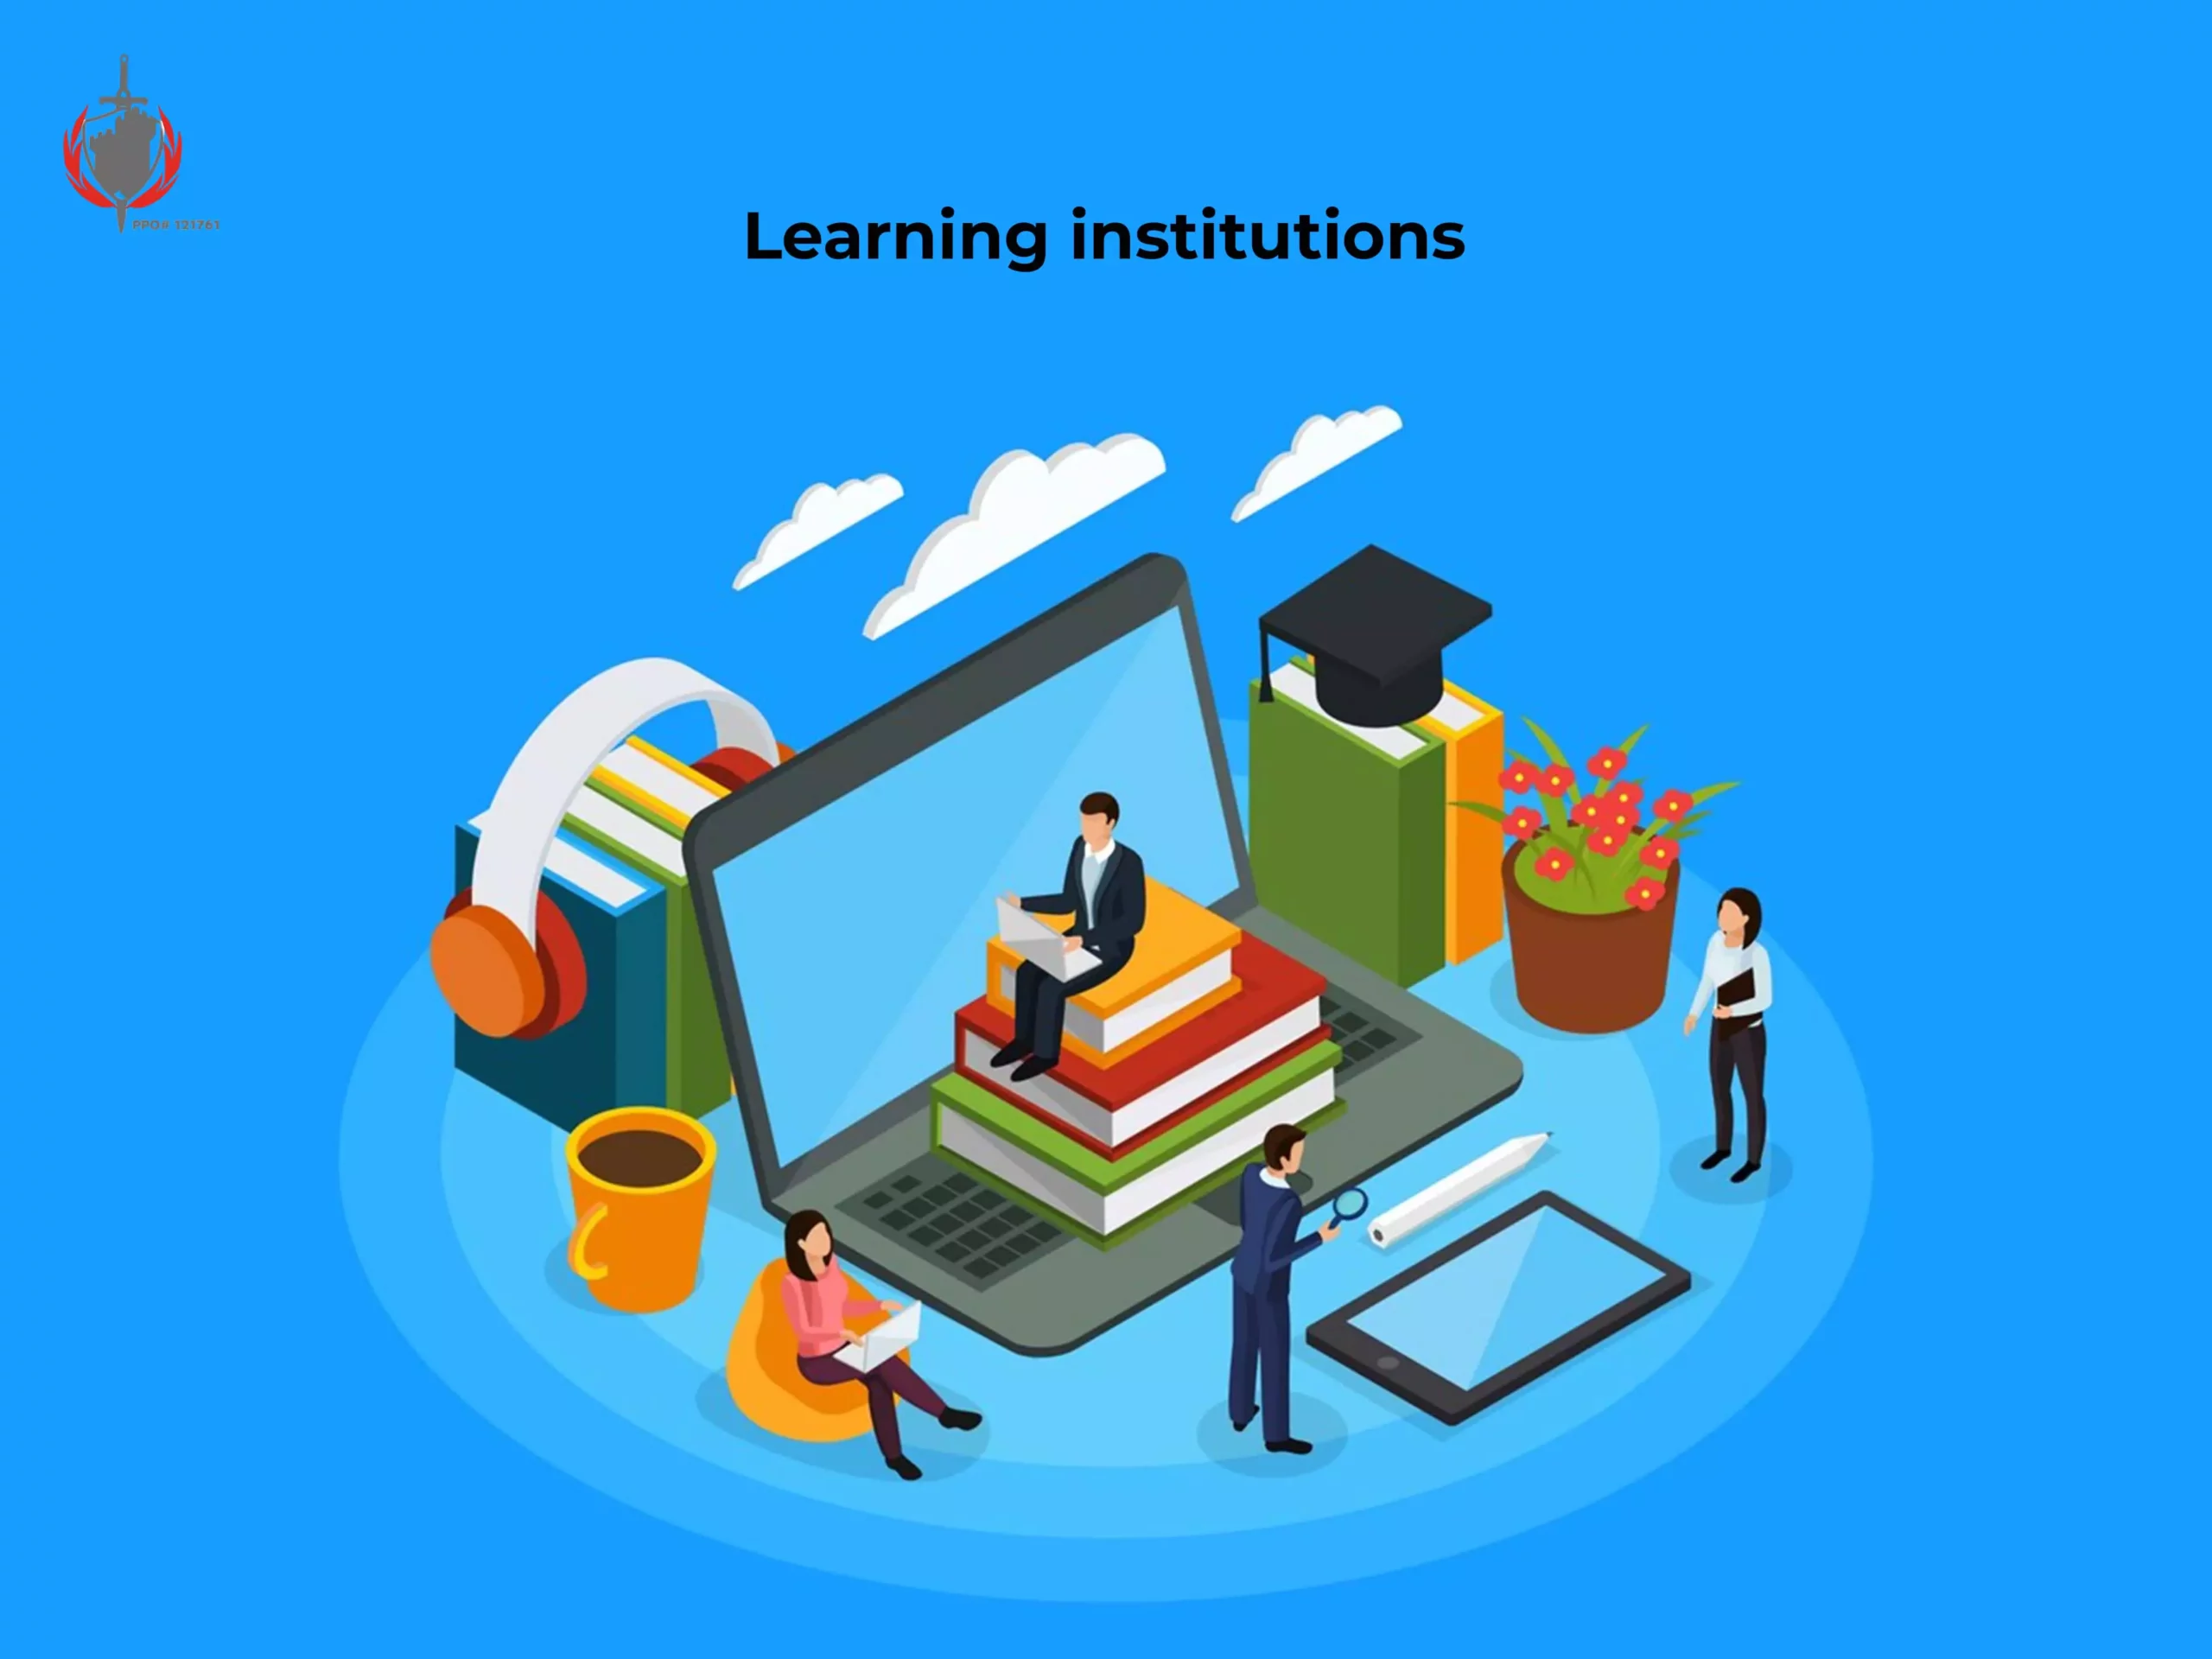 Learning institutions